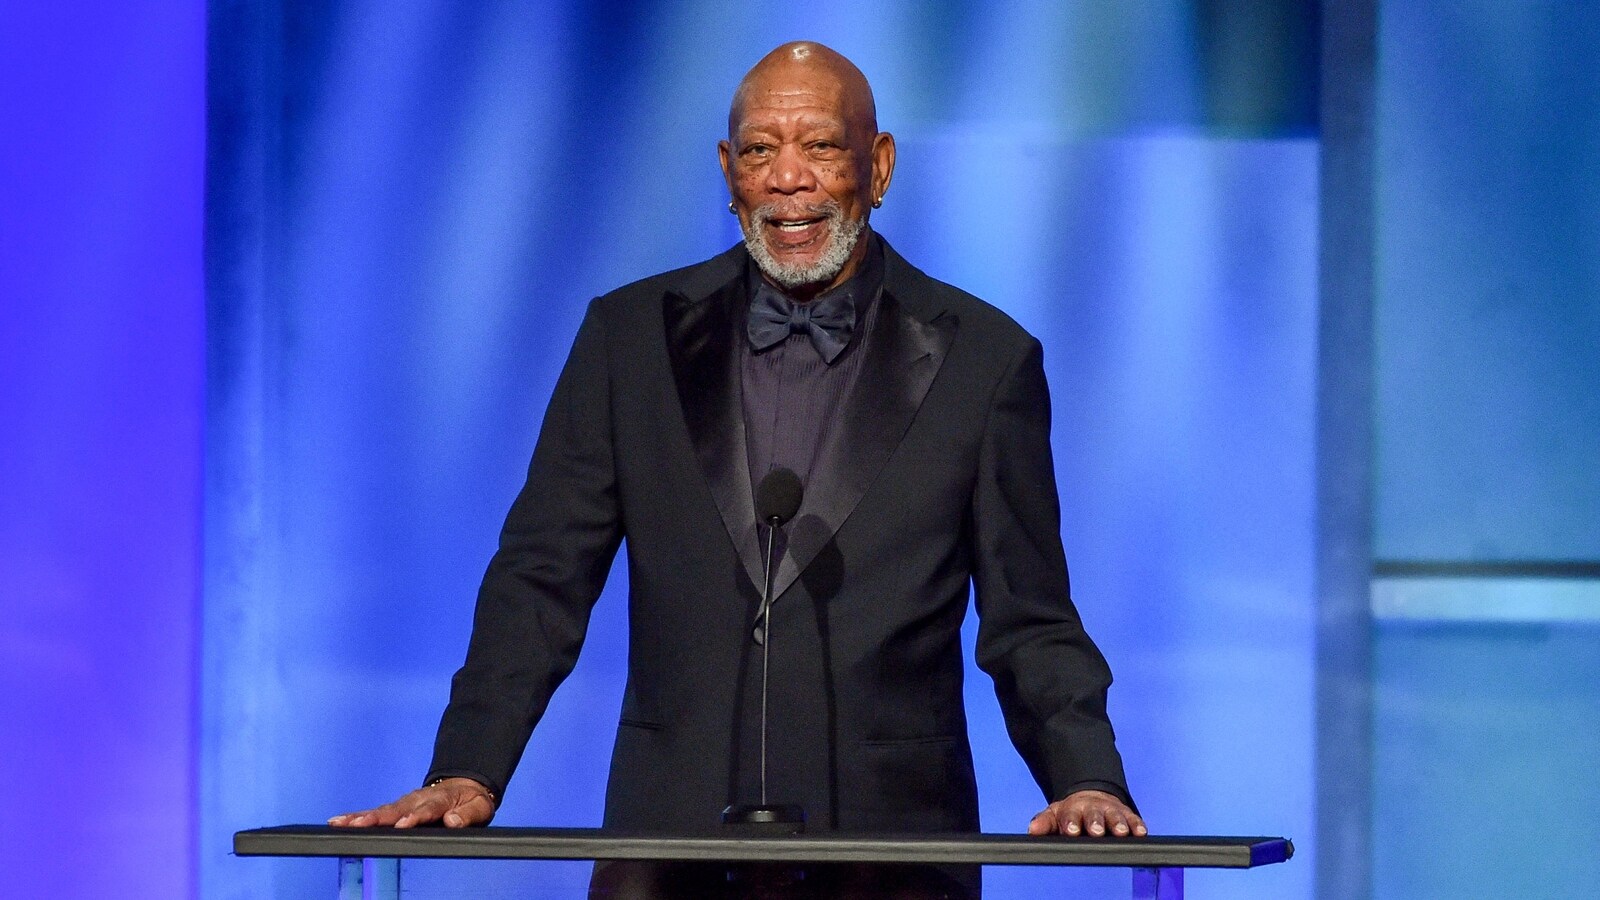 Morgan Freeman thinks a second Donald Trump presidency would be ‘good for the country’, claims viral post